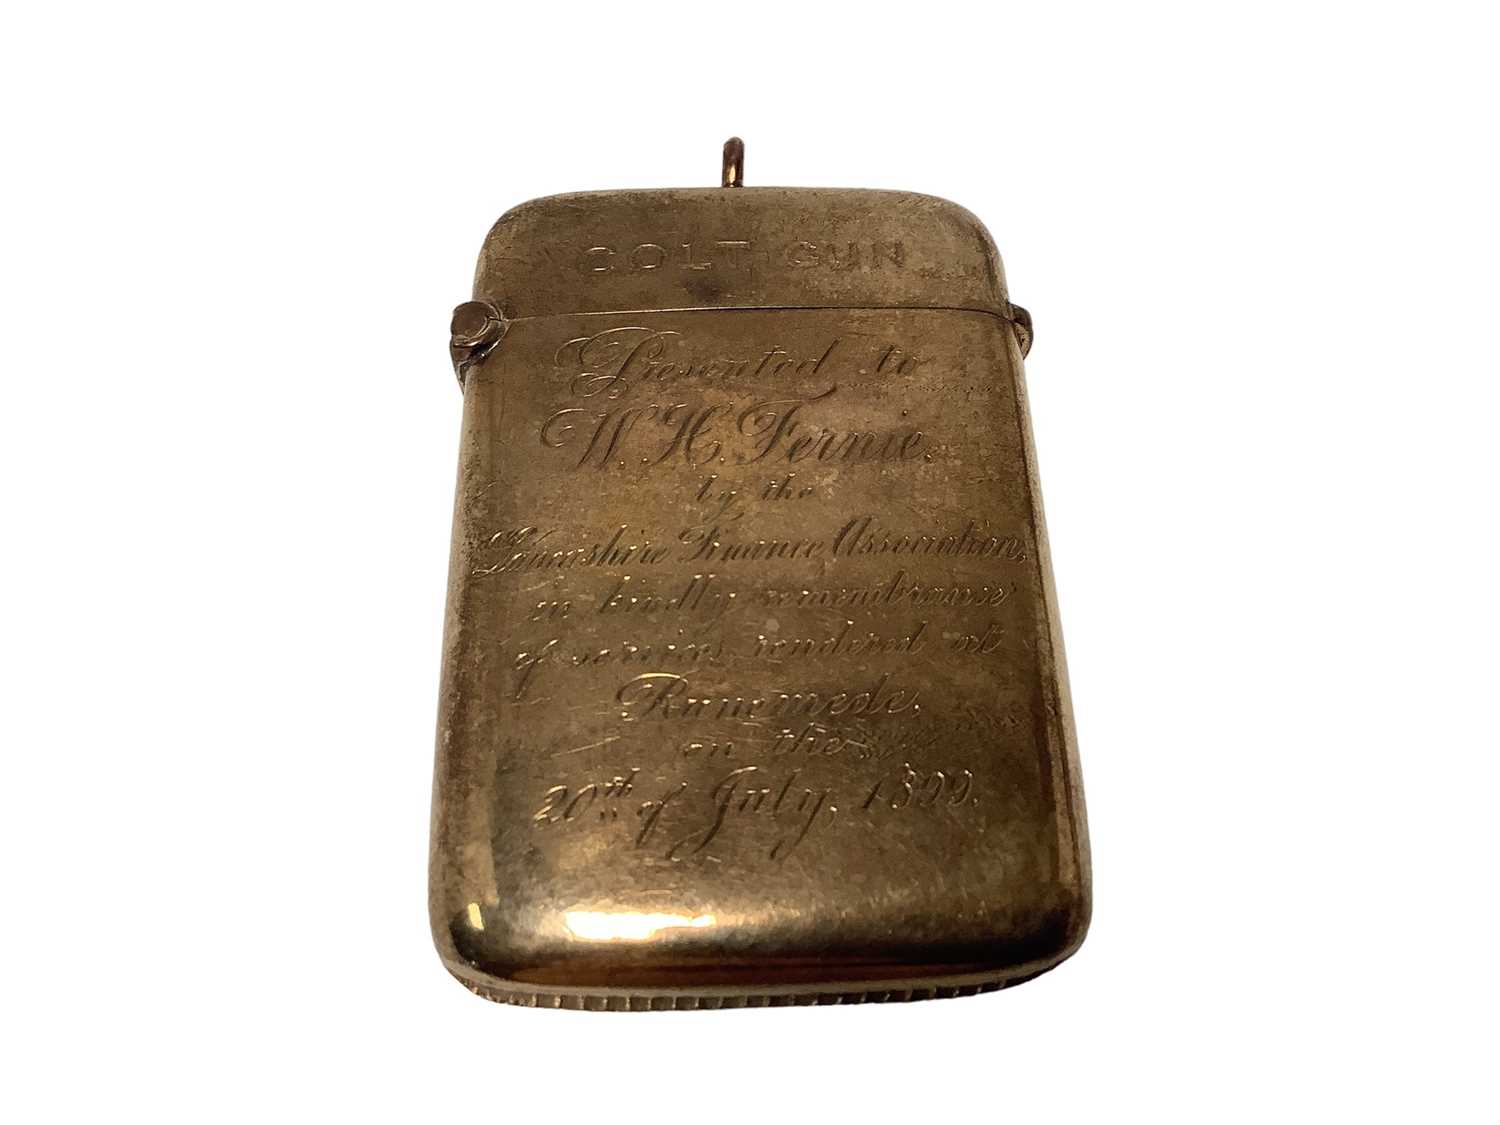 Lot 28 - Victorian gold 9ct Vesta case engraved ' Colt Gun' and ' Presented to W.H.Fernie by the Lancashire Finance Association in kindly remembrance of services rendered at Runemede on 20th July 1899' ( Bi...